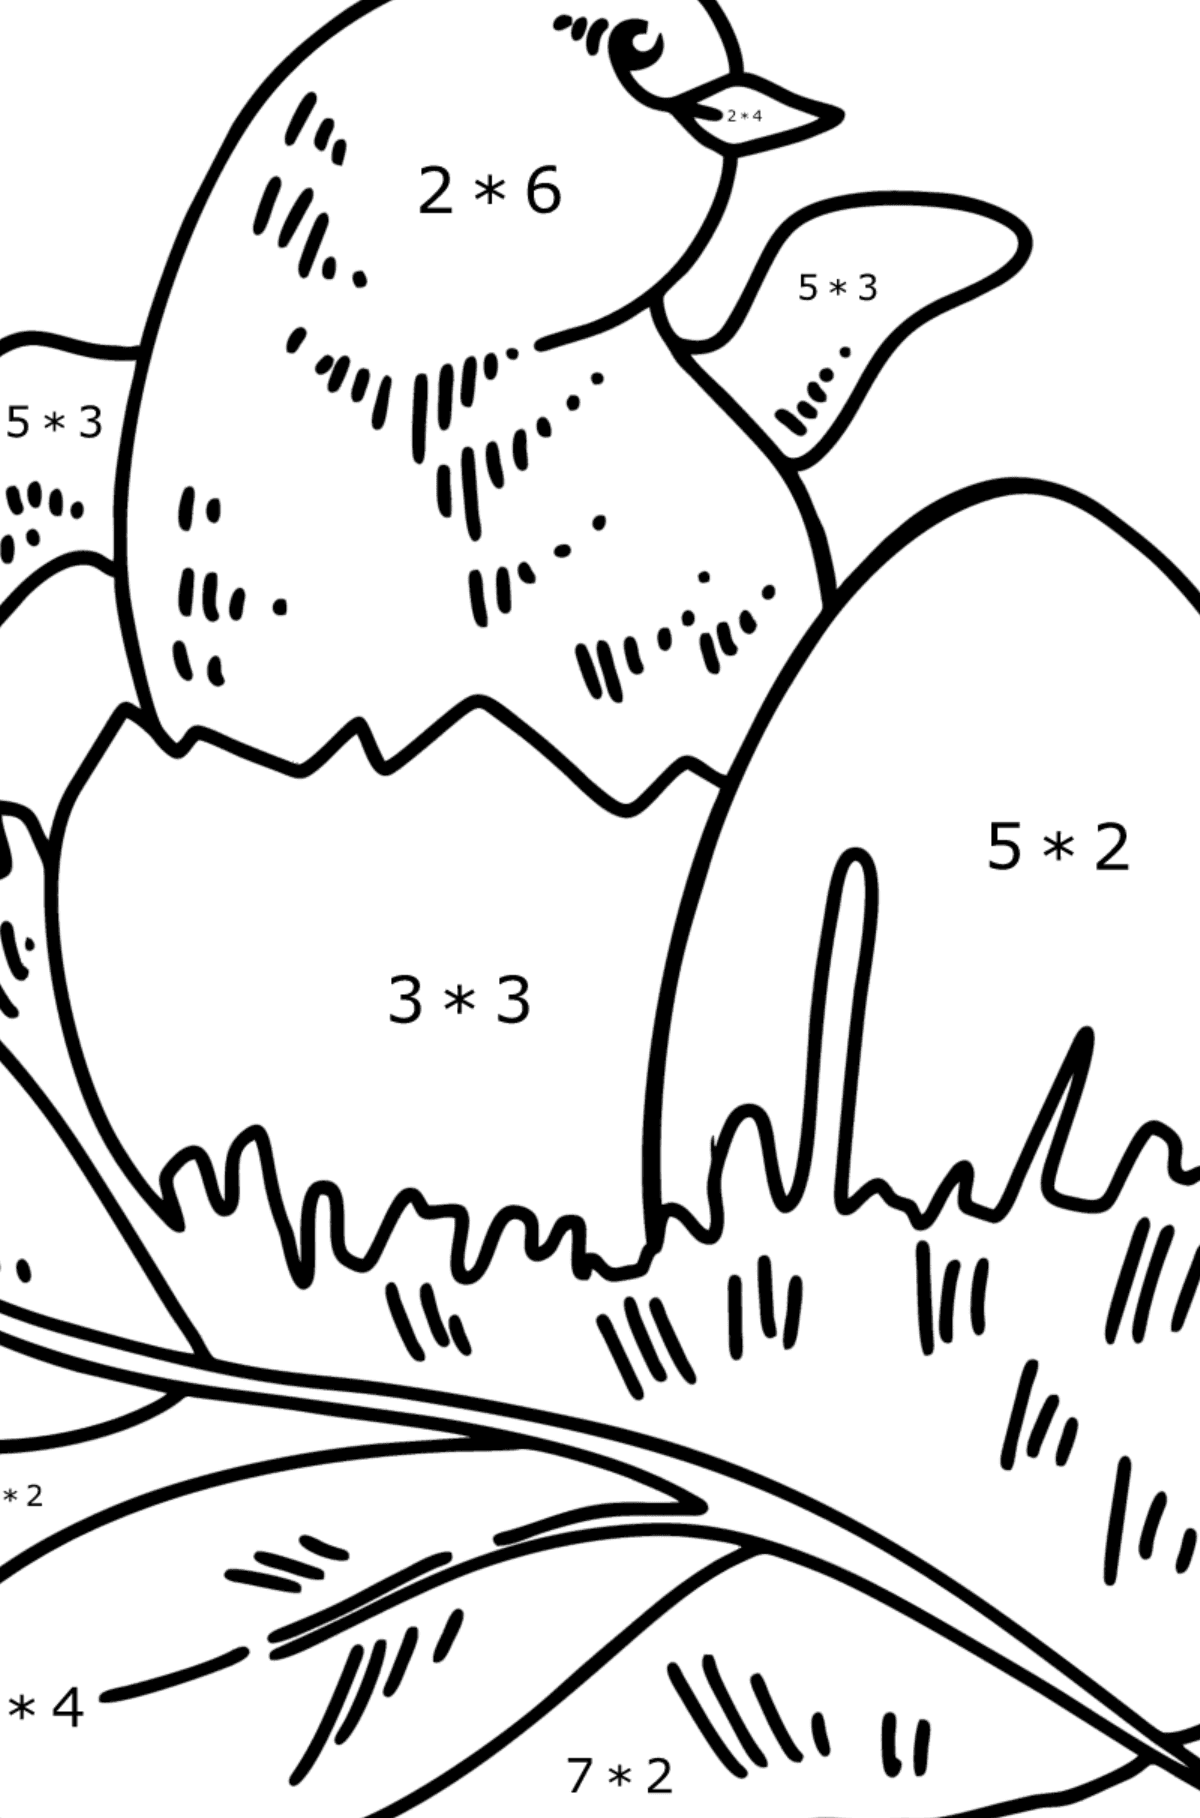 Chick in the Nest coloring page - Math Coloring - Multiplication for Kids